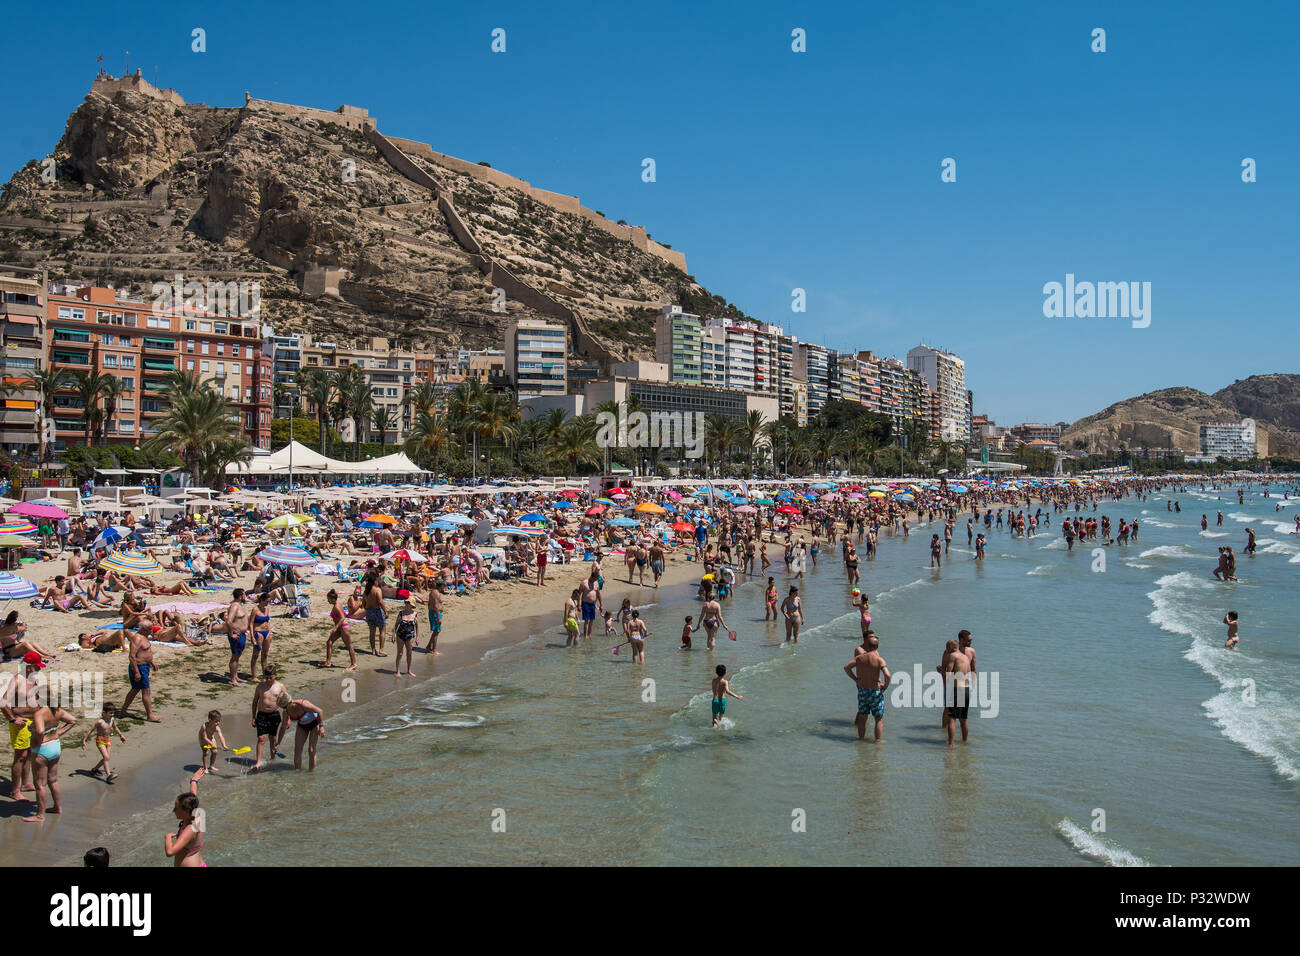 Alicante, Spain. 17th June, 2018. El Postiguet city beach crowded during a  sunny day as high